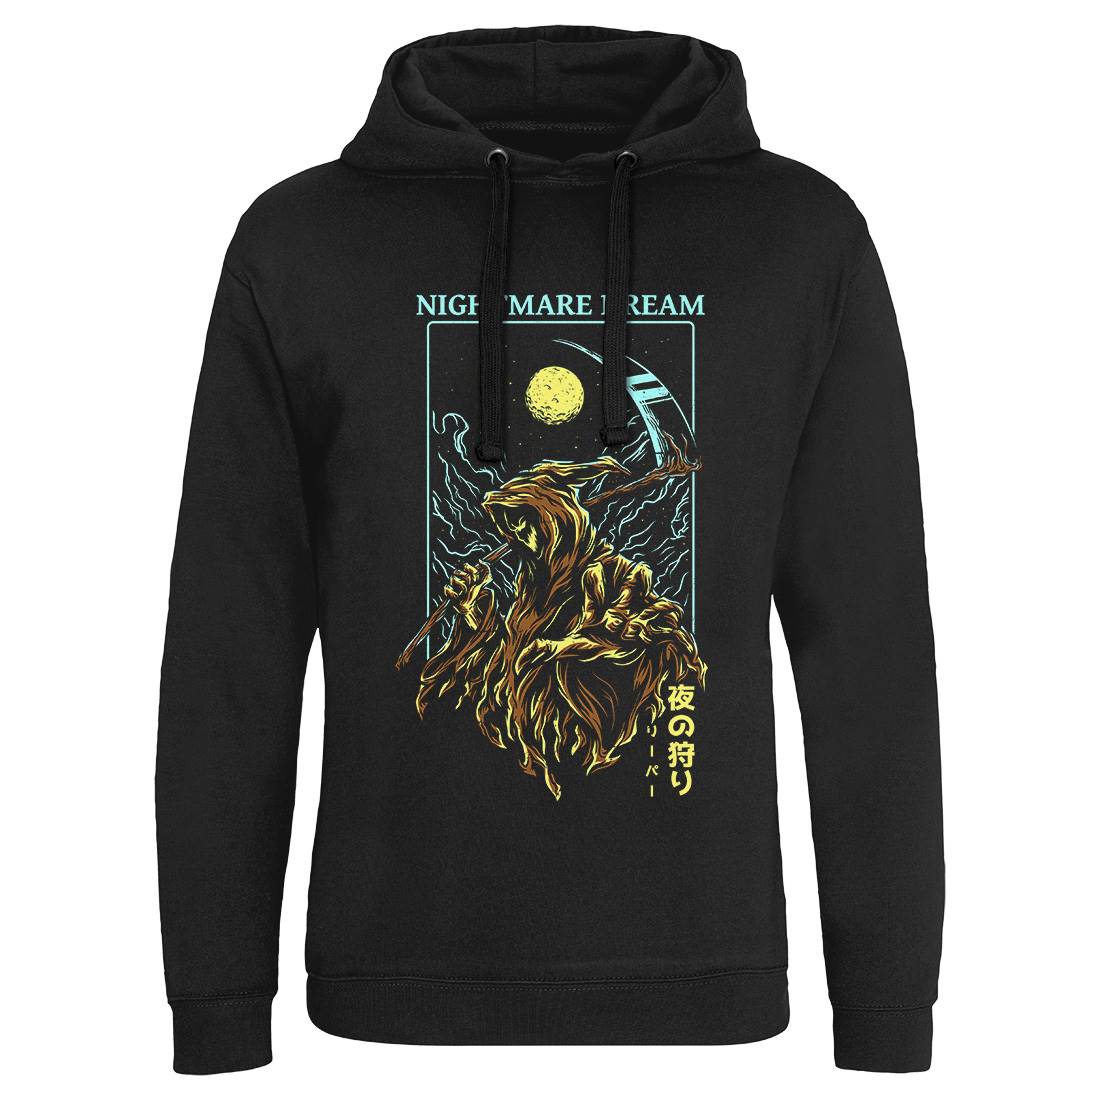 Nightmare Dream Mens Hoodie Without Pocket Horror D667